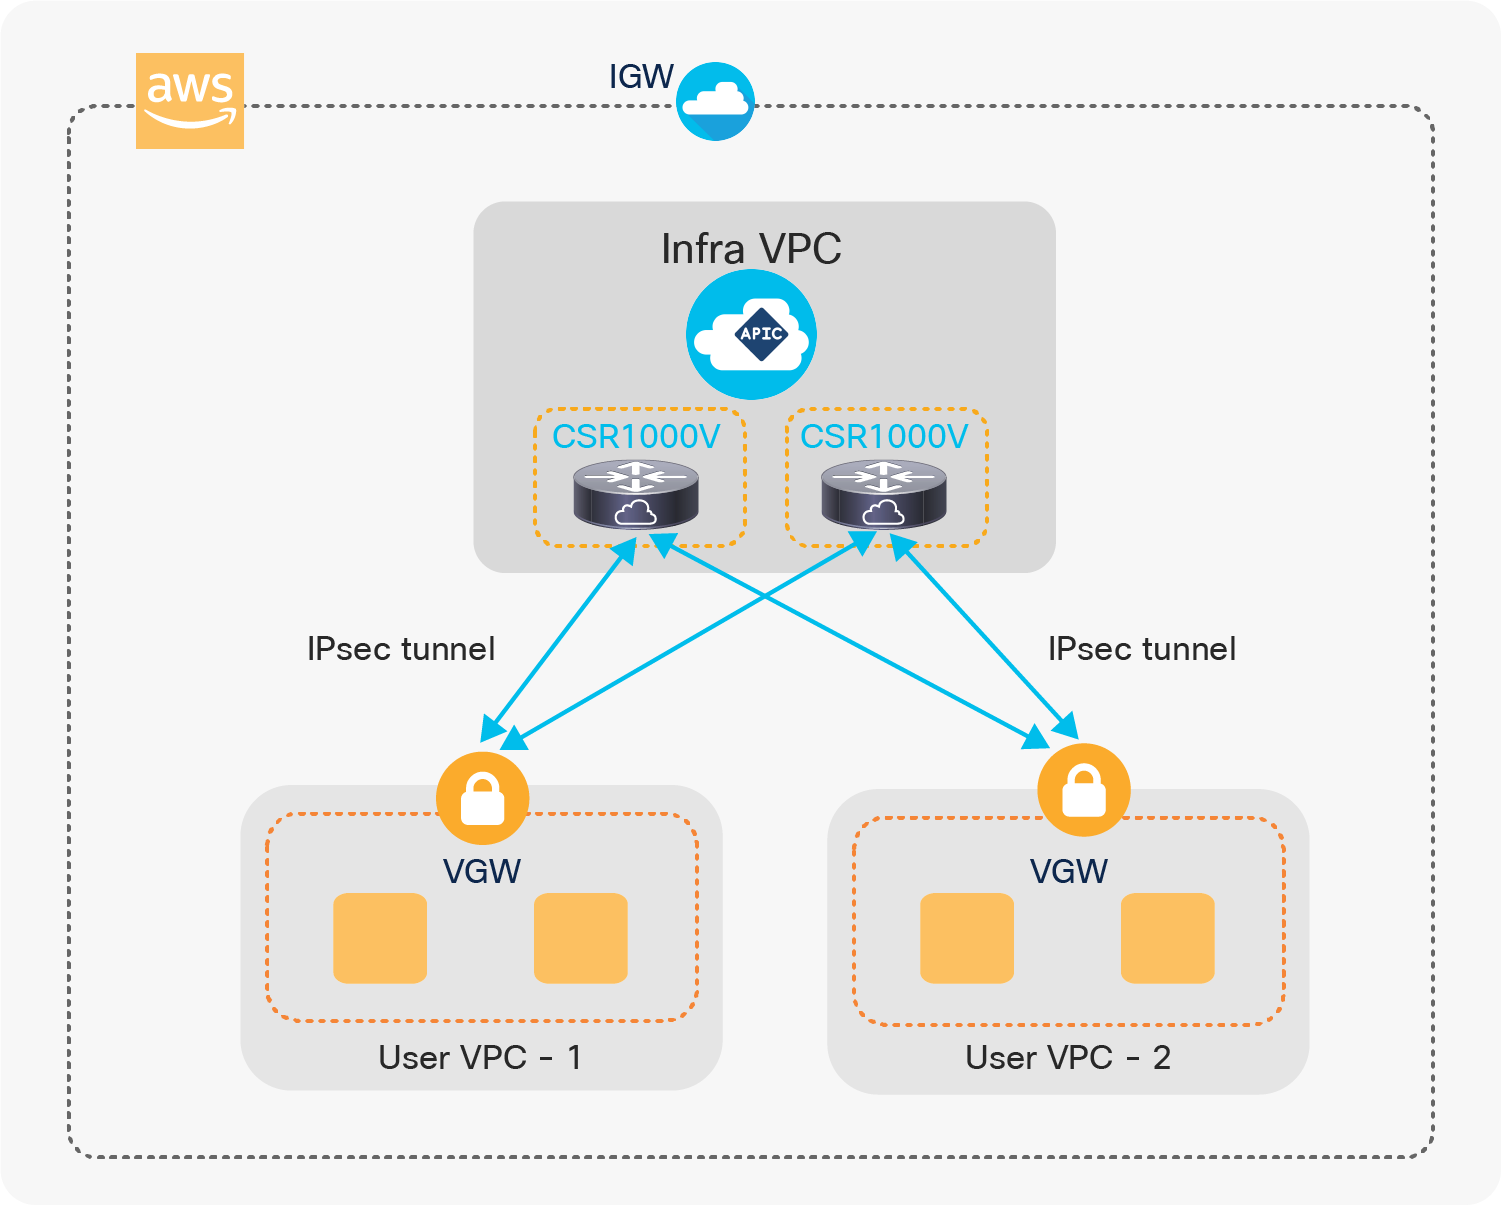 Inside the cloud using IPsec tunnels with VGW